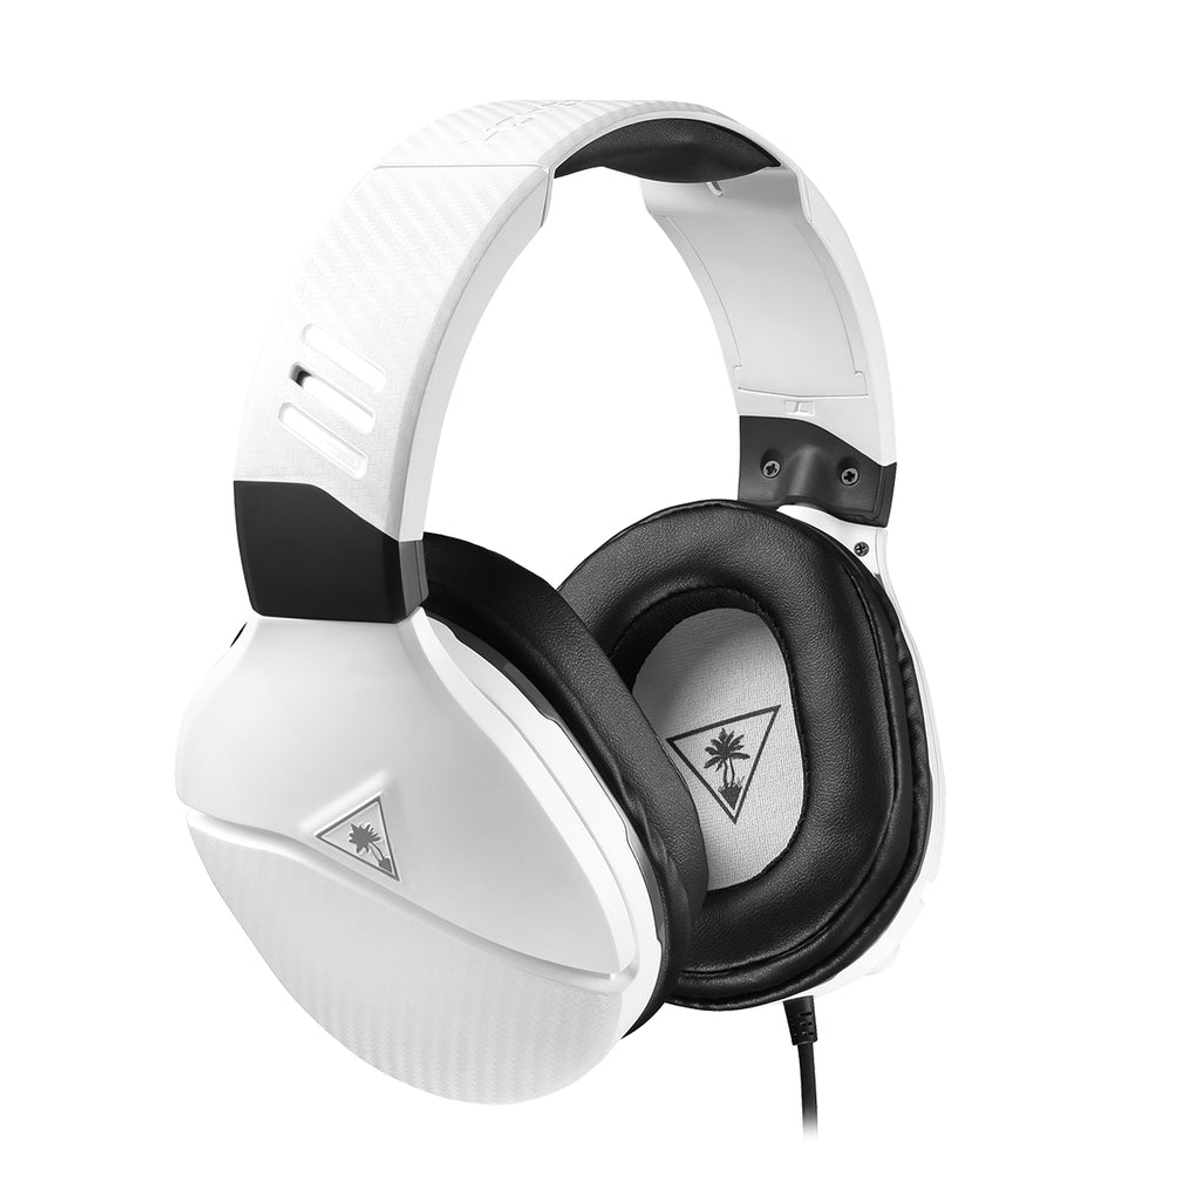 OVER-EAR On-ear TBS-3220-02 200 TURTLE Gaming WH, RECON BEACH Weiß Headset